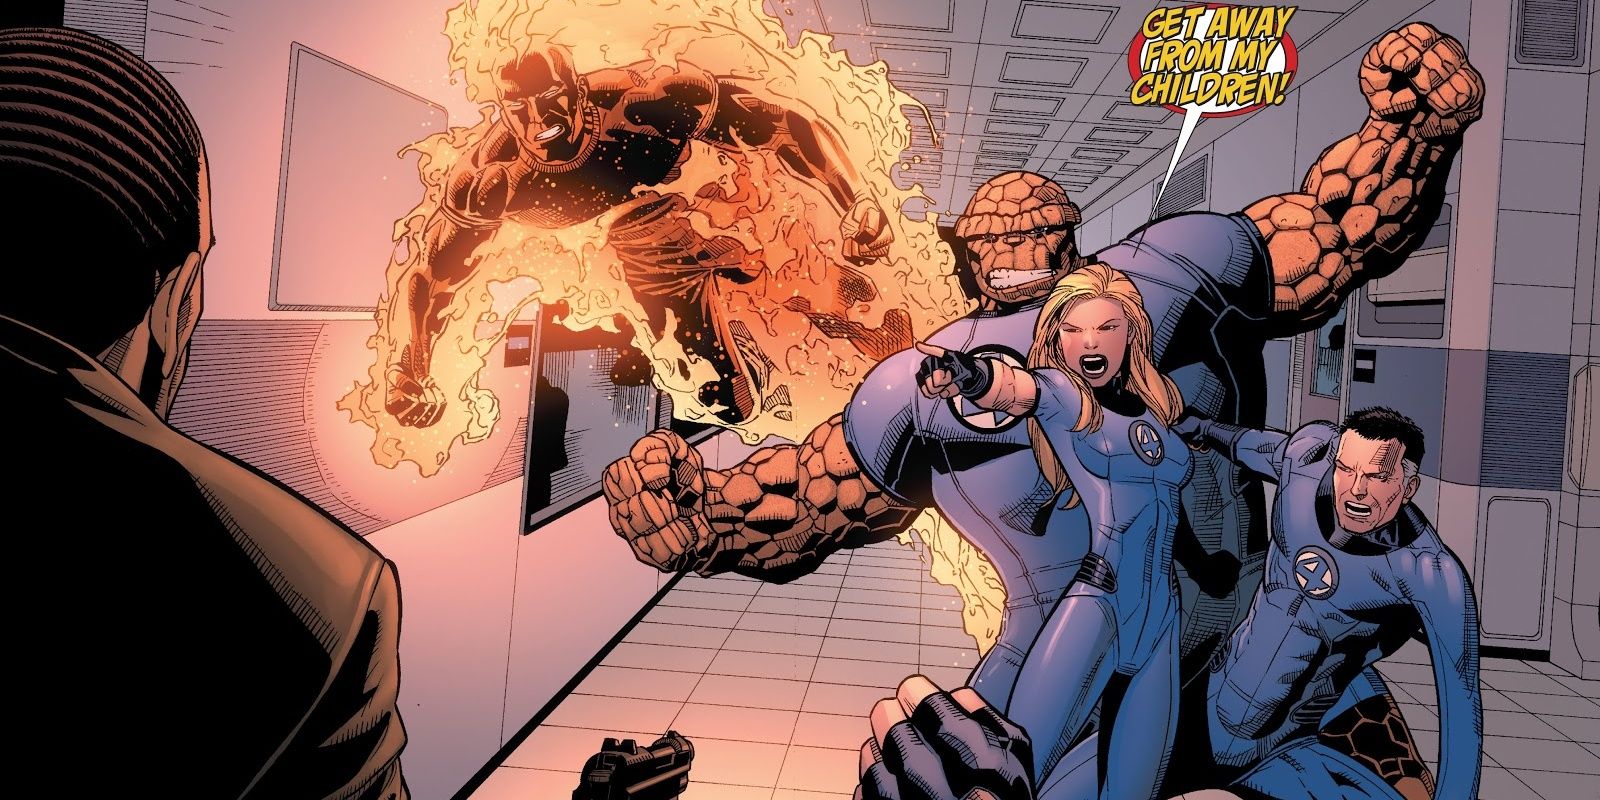 Fantastic Four defend The Baxter Building From An Intruder